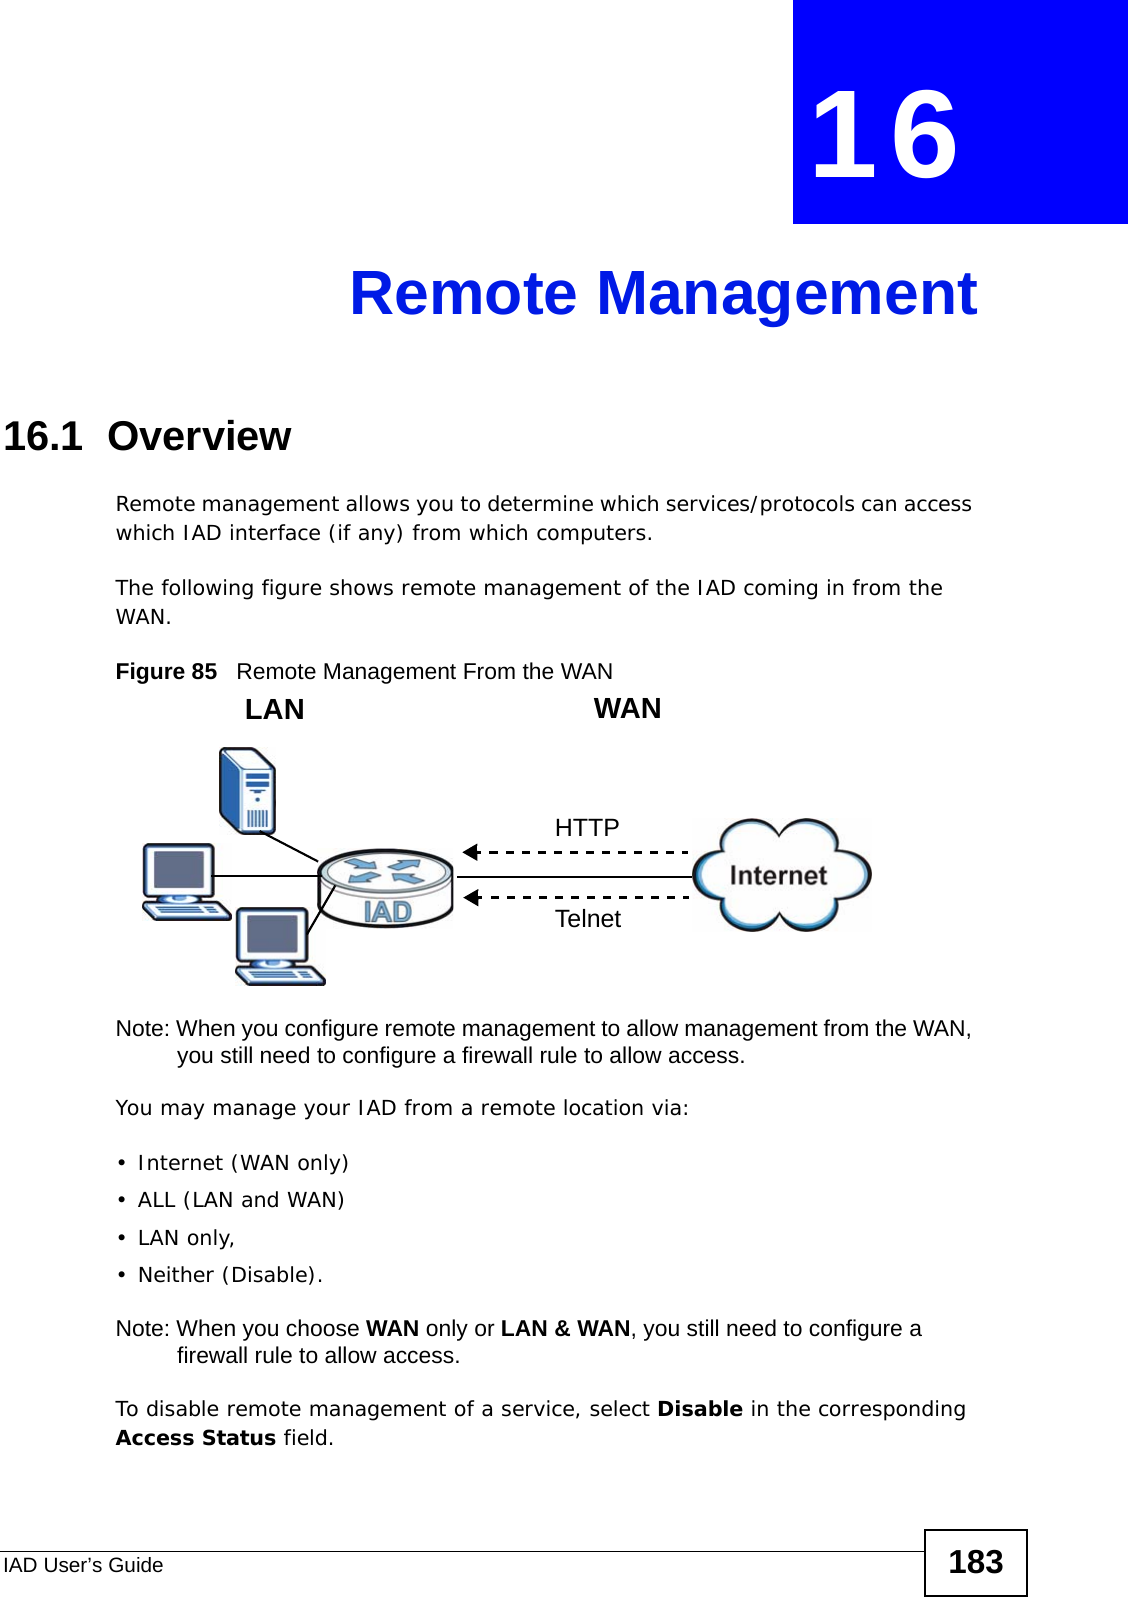 IAD User’s Guide 183CHAPTER  16 Remote Management16.1  Overview Remote management allows you to determine which services/protocols can access which IAD interface (if any) from which computers.The following figure shows remote management of the IAD coming in from the WAN.Figure 85   Remote Management From the WANNote: When you configure remote management to allow management from the WAN, you still need to configure a firewall rule to allow access.You may manage your IAD from a remote location via:•Internet (WAN only)•ALL (LAN and WAN)•LAN only, • Neither (Disable).Note: When you choose WAN only or LAN &amp; WAN, you still need to configure a firewall rule to allow access.To disable remote management of a service, select Disable in the corresponding Access Status field.LAN WANHTTPTelnet